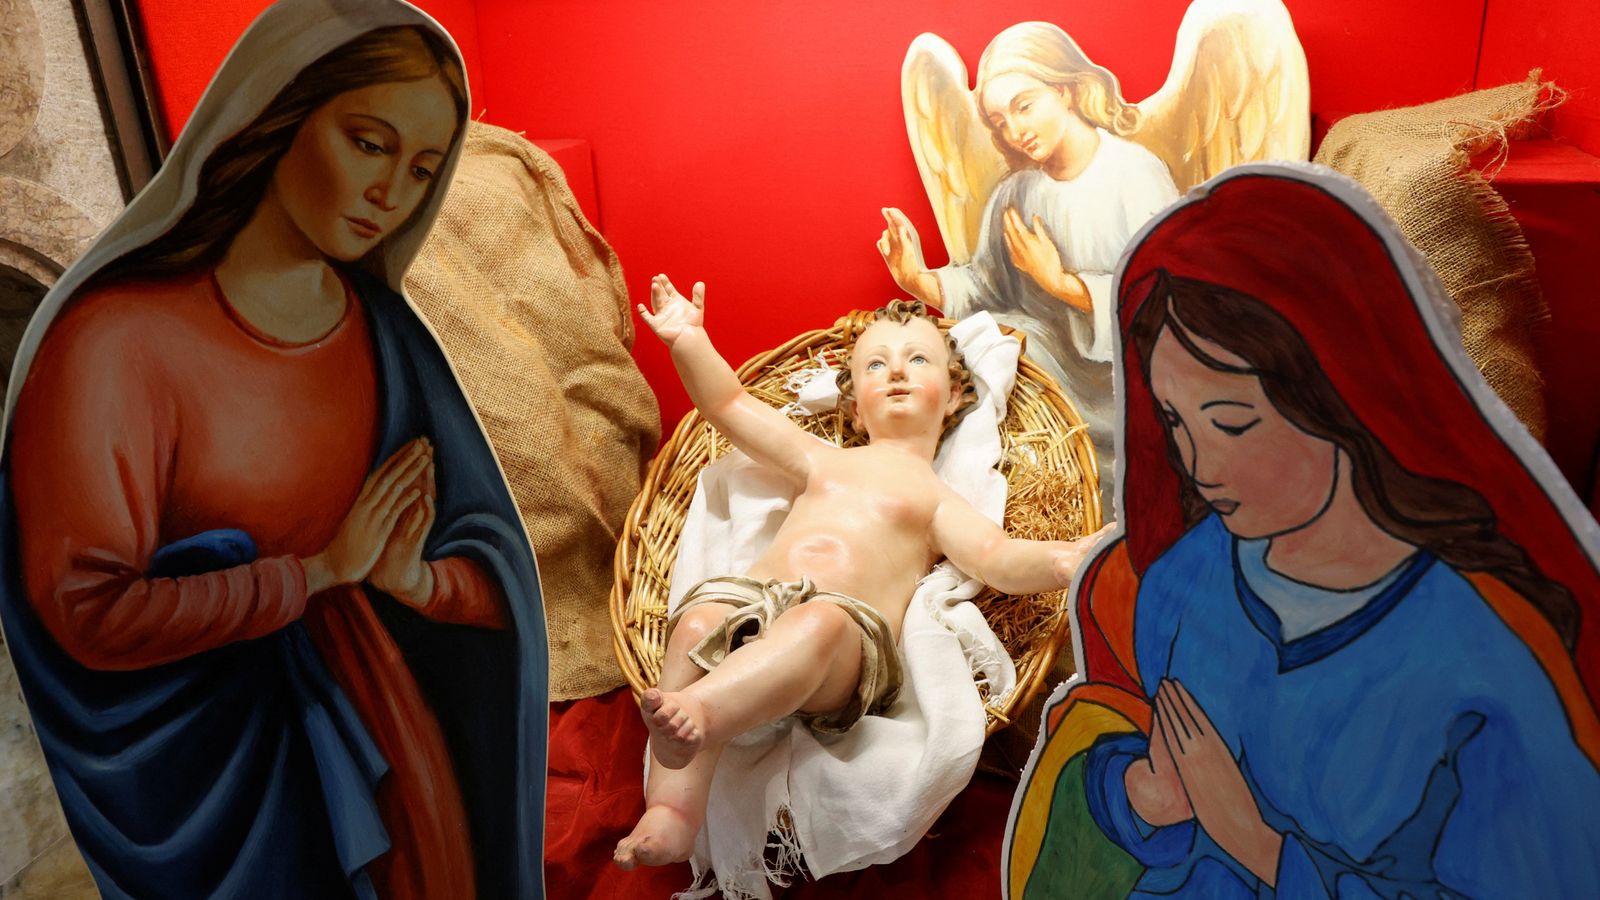 Italy: Church nativity scene featuring two mothers of Jesus sparks accusation of blasphemy